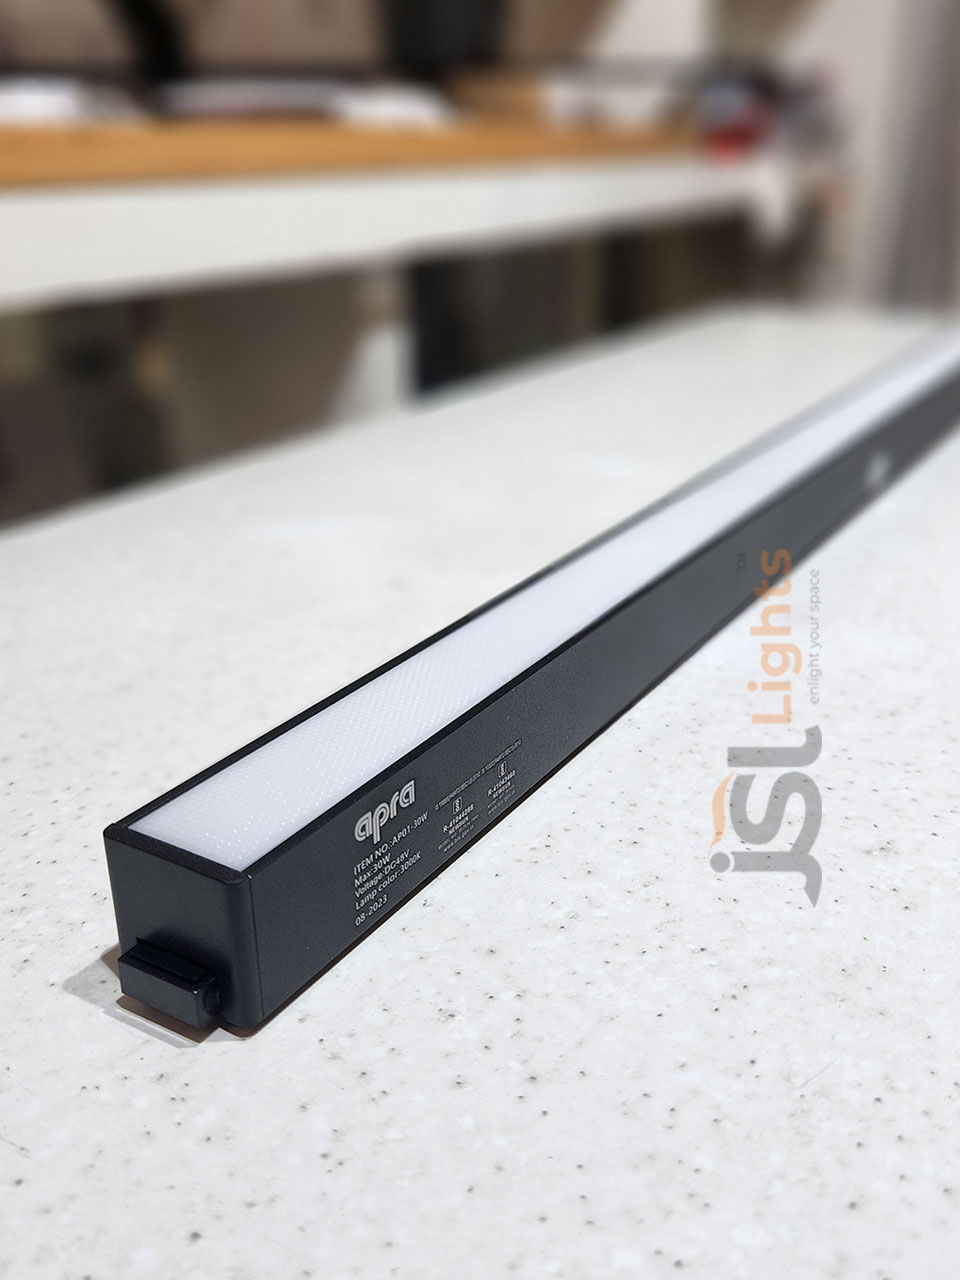 Apra 30W Ultra Thin Linear Diffused Magnetic Track Light MG01 SMD Diffuser Linear Ultra Slim Magnetic Track Light with Black Body